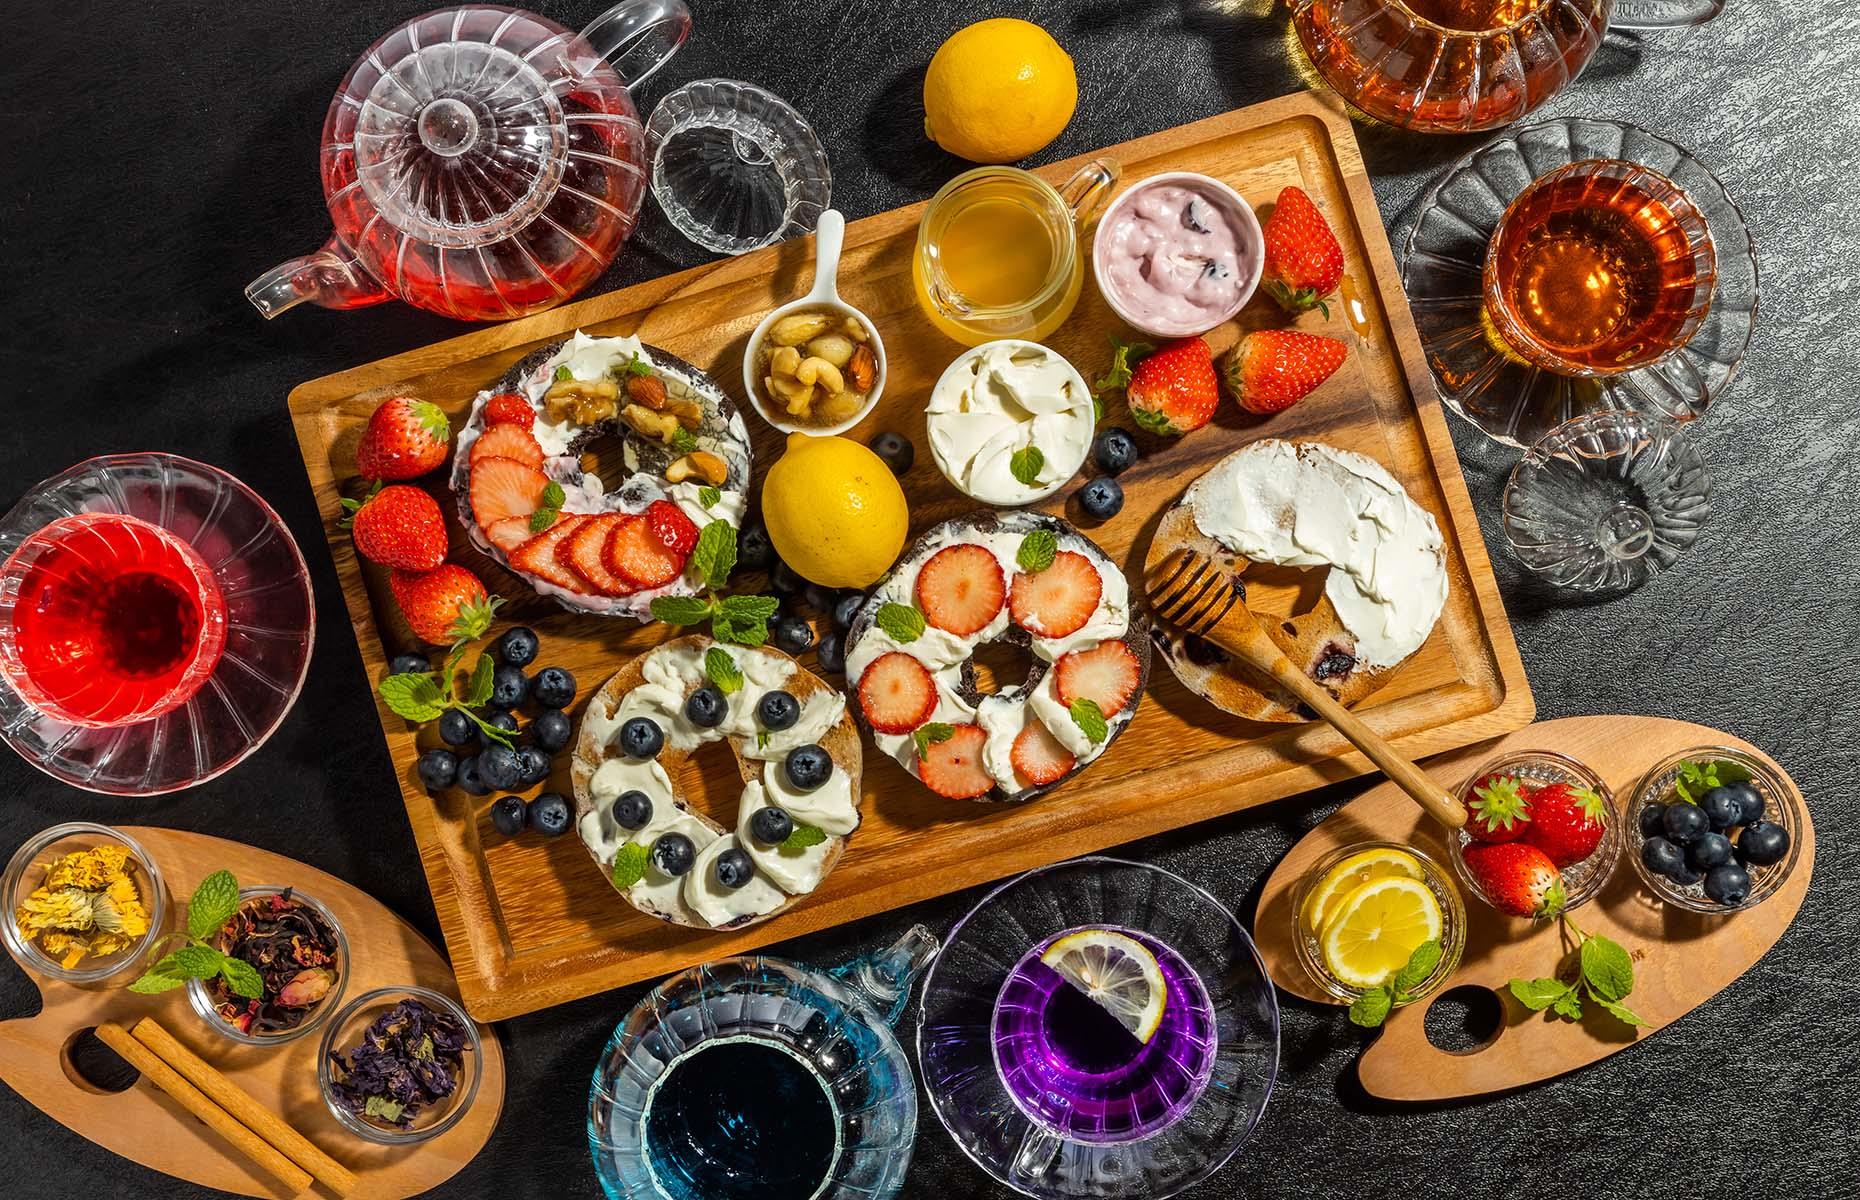 <p>Want to try a board-shaped take on brunch? Cover a wooden platter with sliced bagels smeared with a variety of sweet and savory toppings, and sprinkle with edible flowers for an Instagram-worthy look. Serve it with a steaming pot of your favourite tea, or make it boozy with a mimosa or two.</p>  <p><a href="https://www.lovefood.com/recipes/57971/blueberry-and-cranberry-bagels-recipe"><strong>Get the recipe for blueberry and cranberry bagels here</strong></a></p>